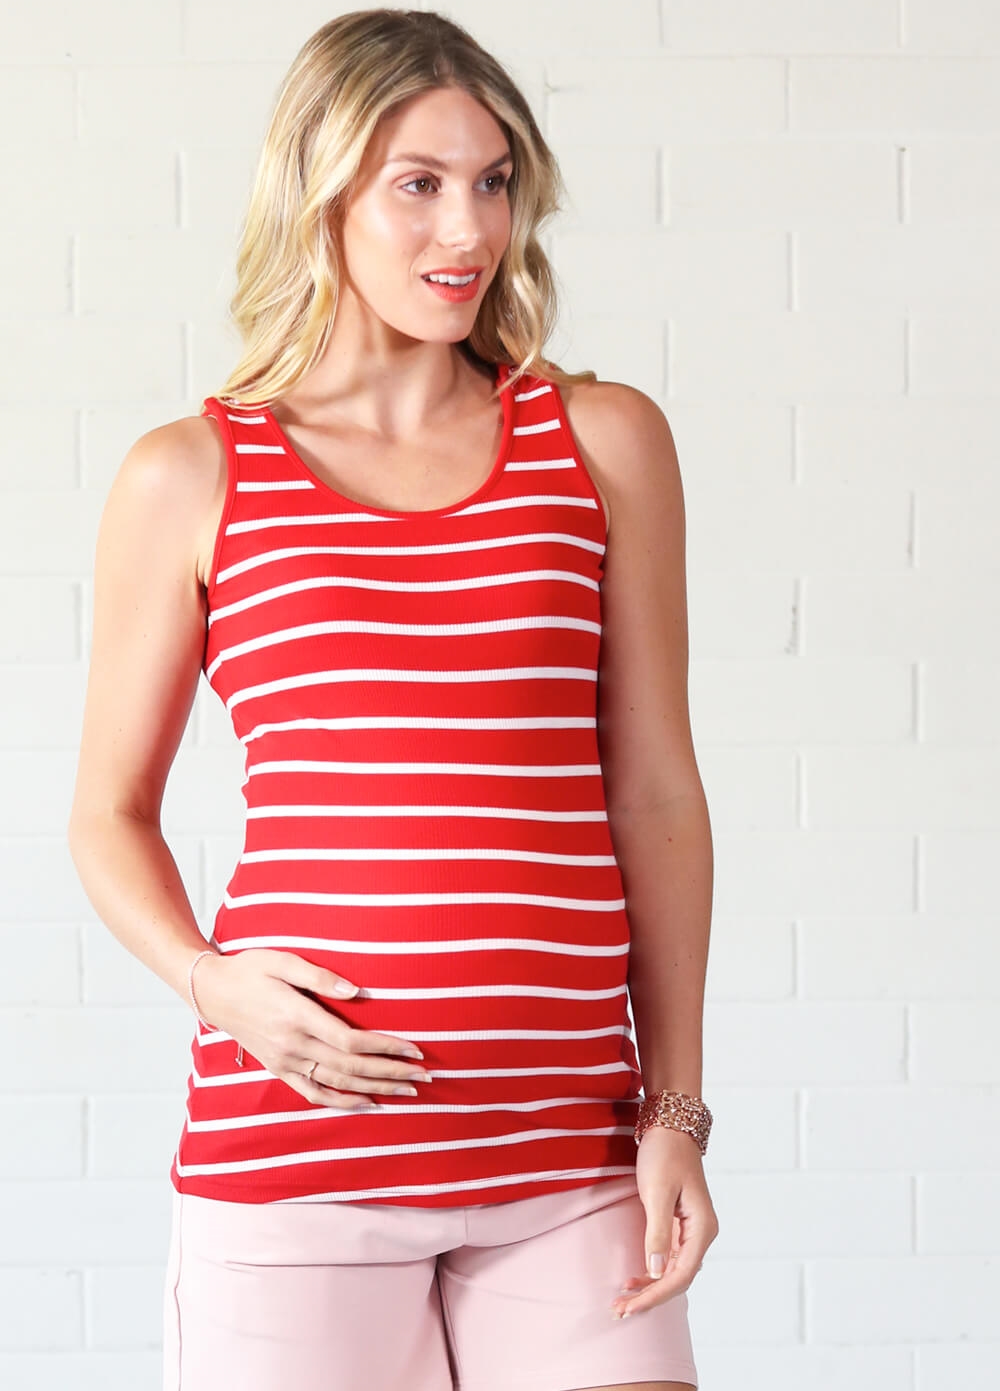 Trimester™ - Laurina Red Striped Nursing Tank Top - ON SALE